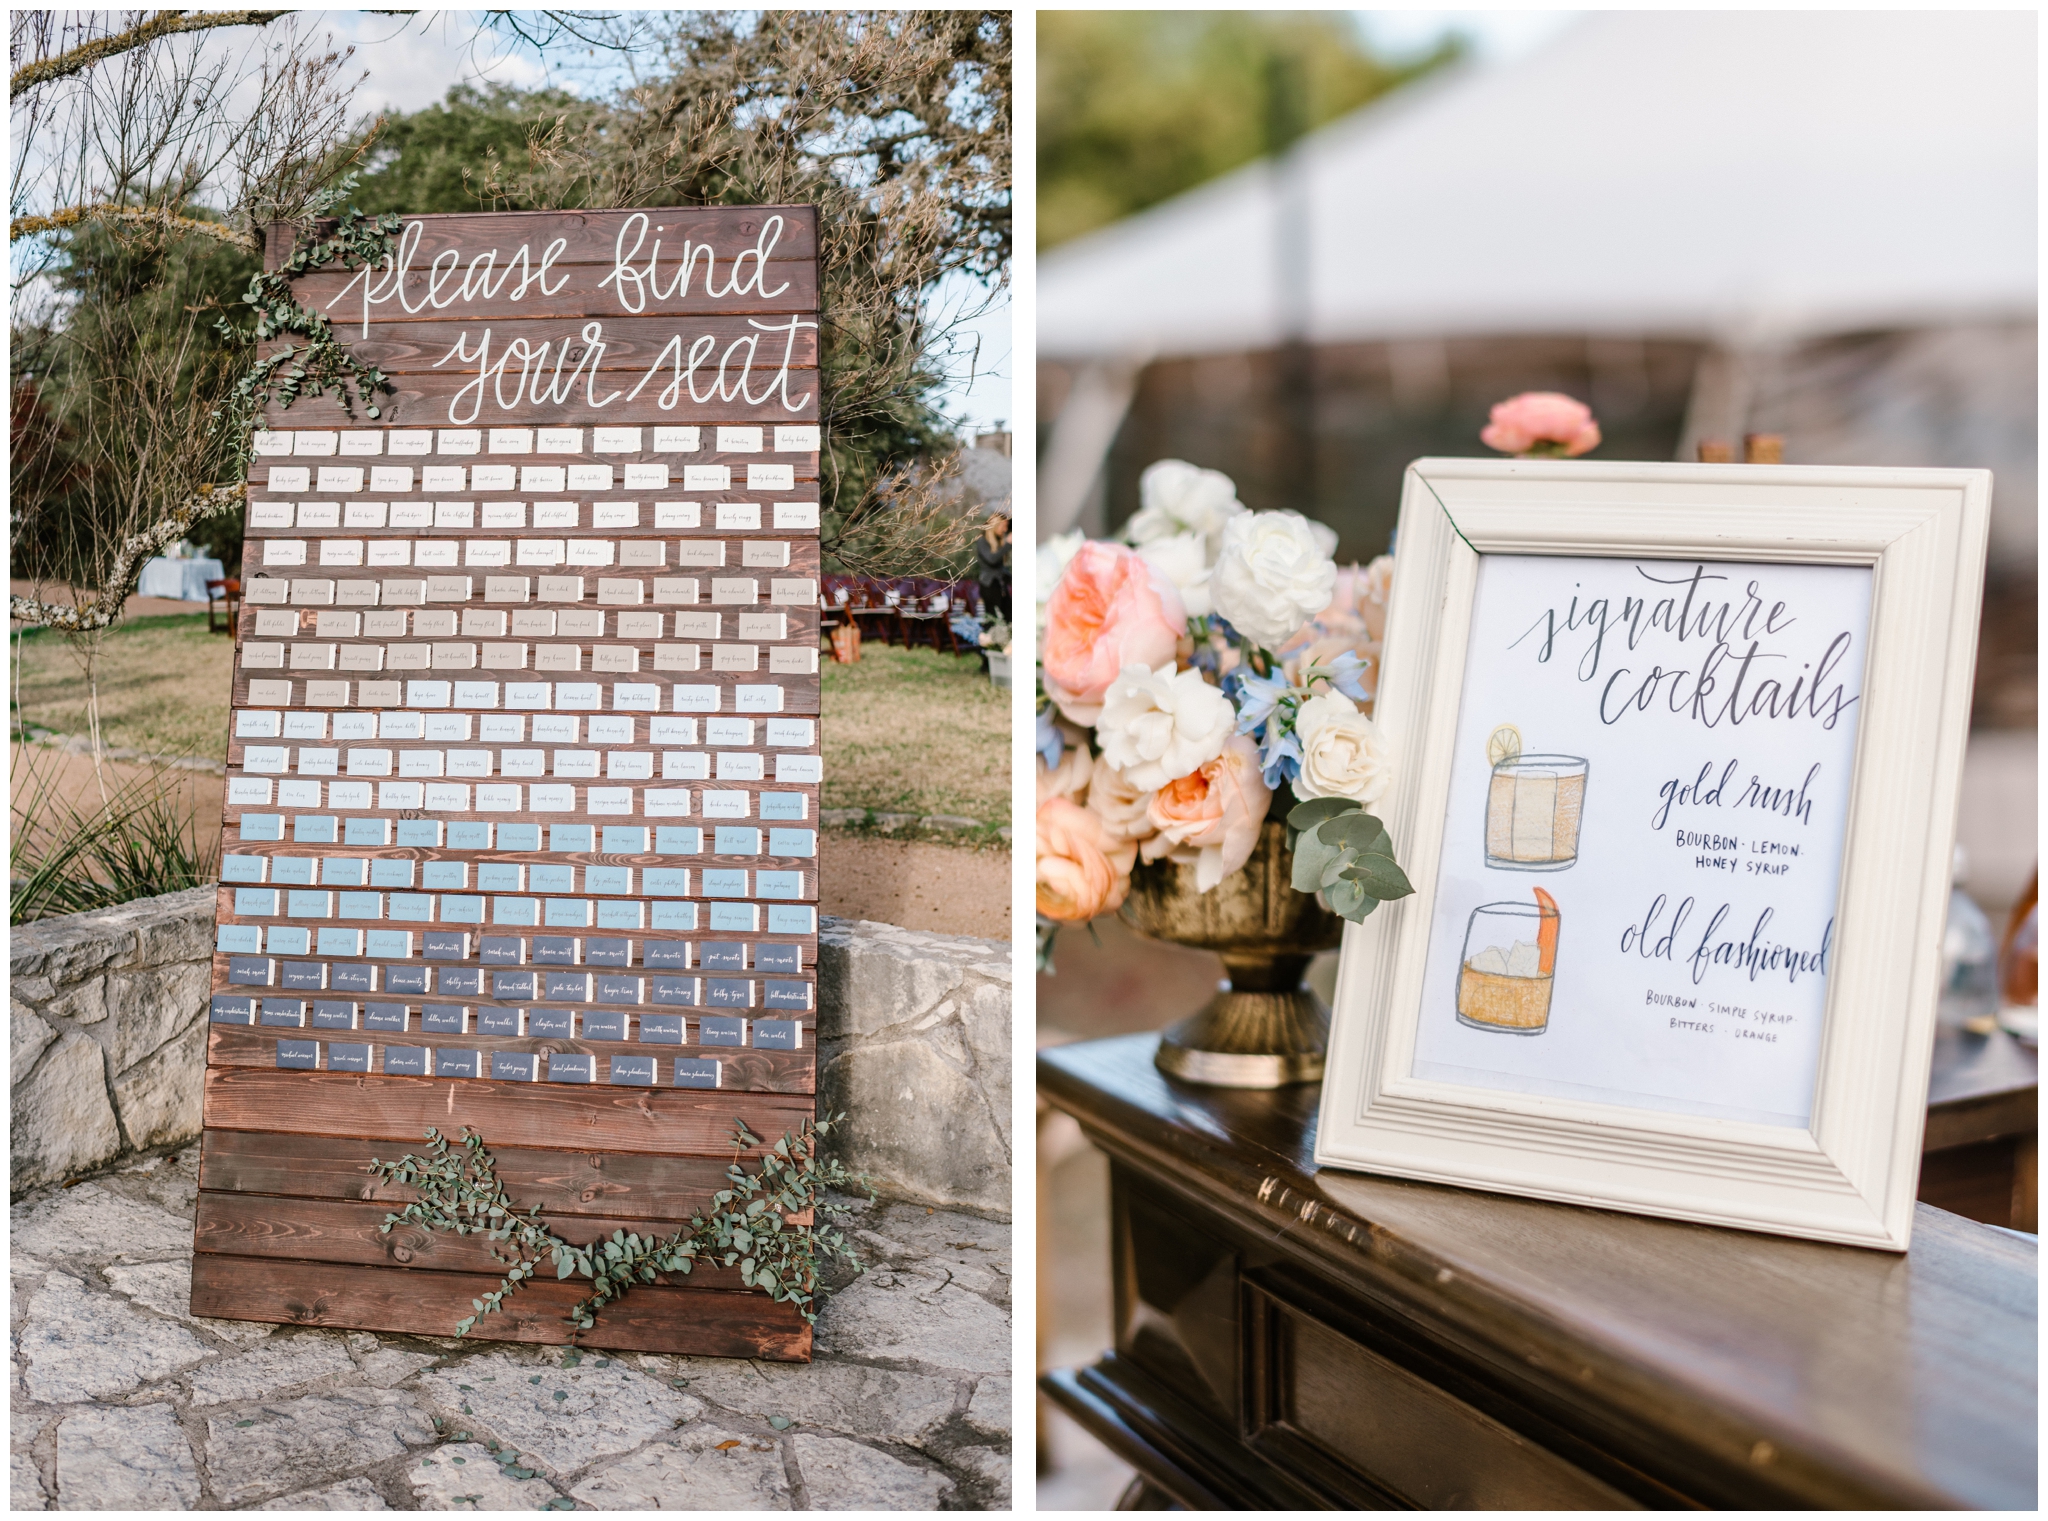 Blue, peach and orange fall wedding at The Greenhouse at Driftwood in Austin Texas | Joslyn Holtfort Photography